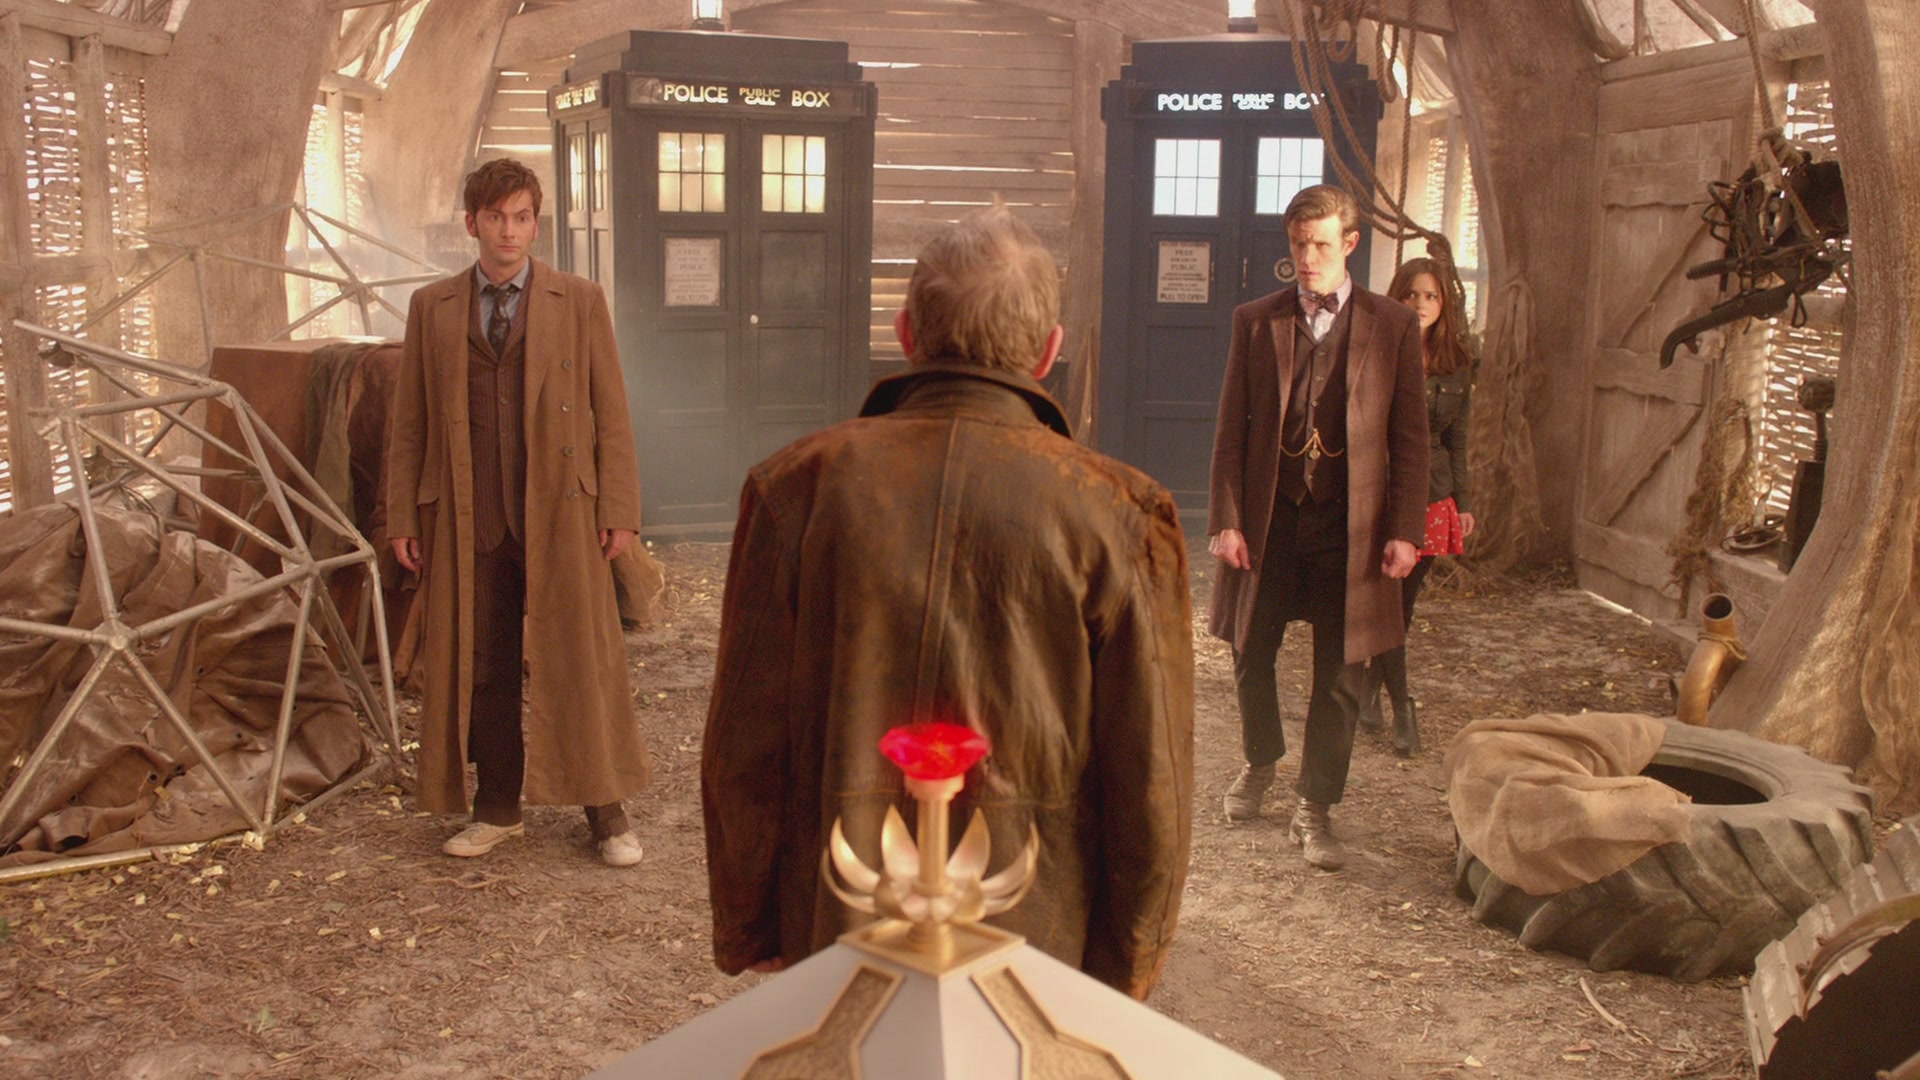 DayOfTheDoctor-Caps-1074.jpg